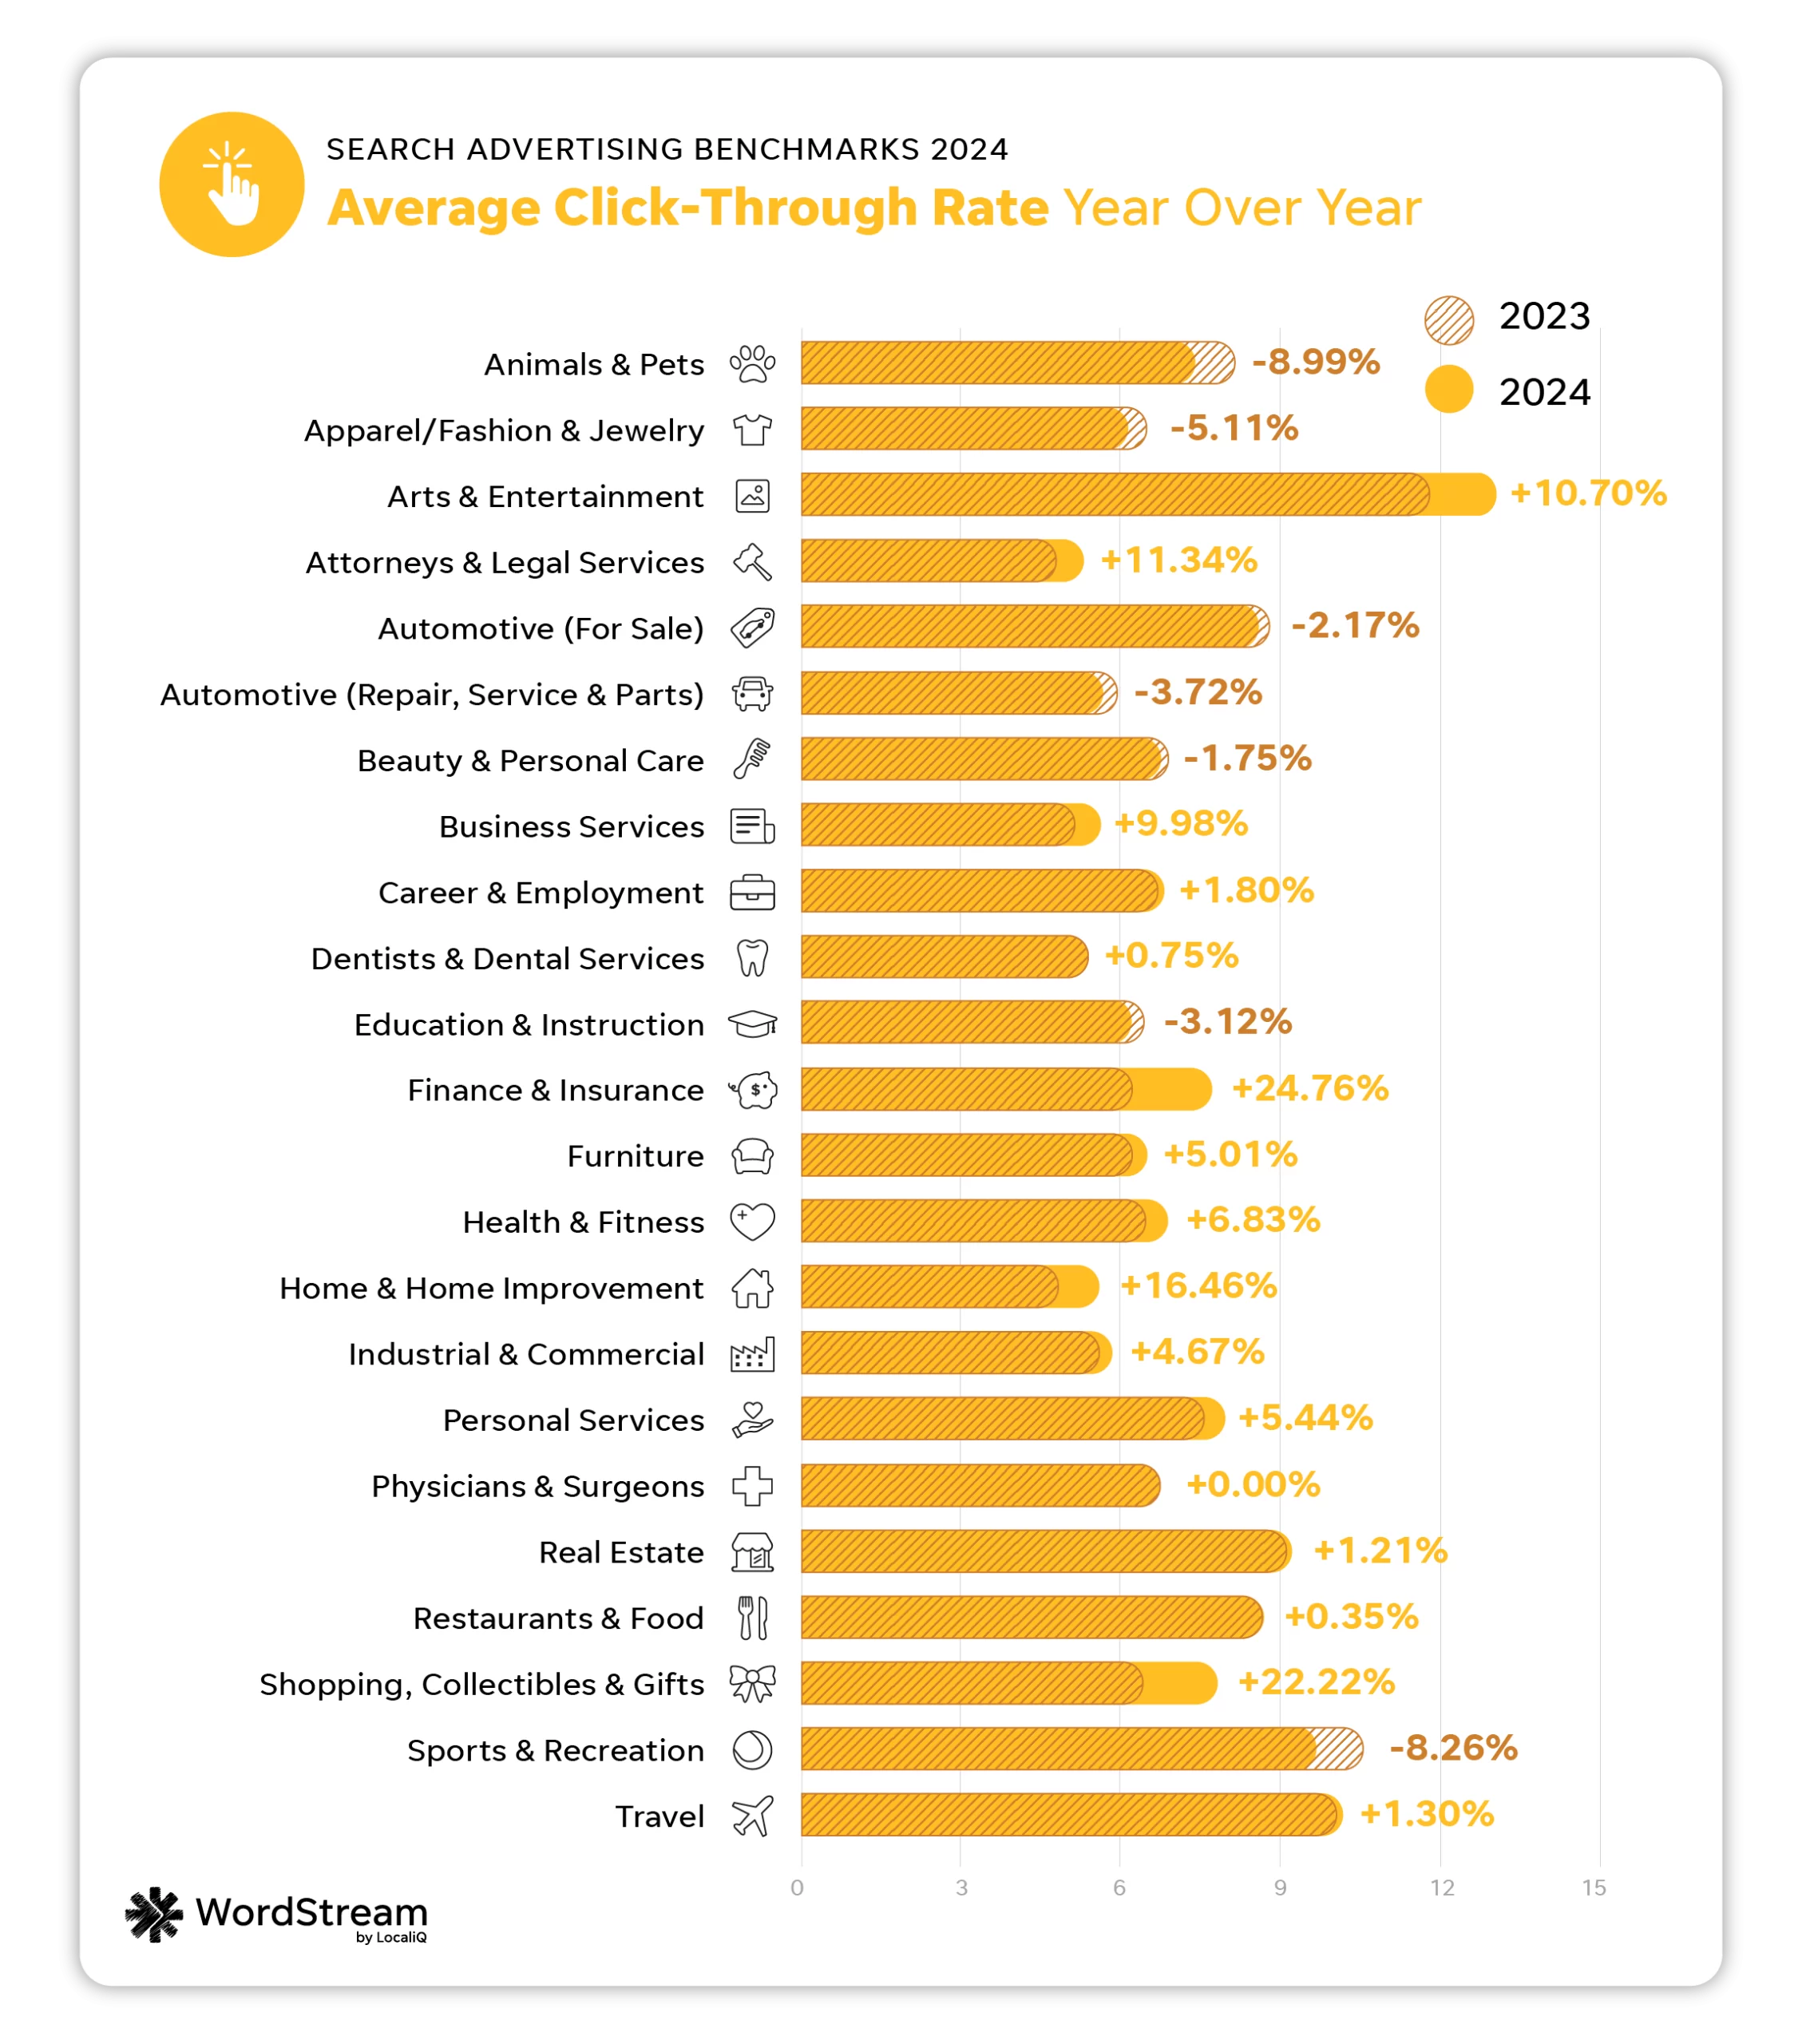 google ads benchmarks - average click-through rate year over year